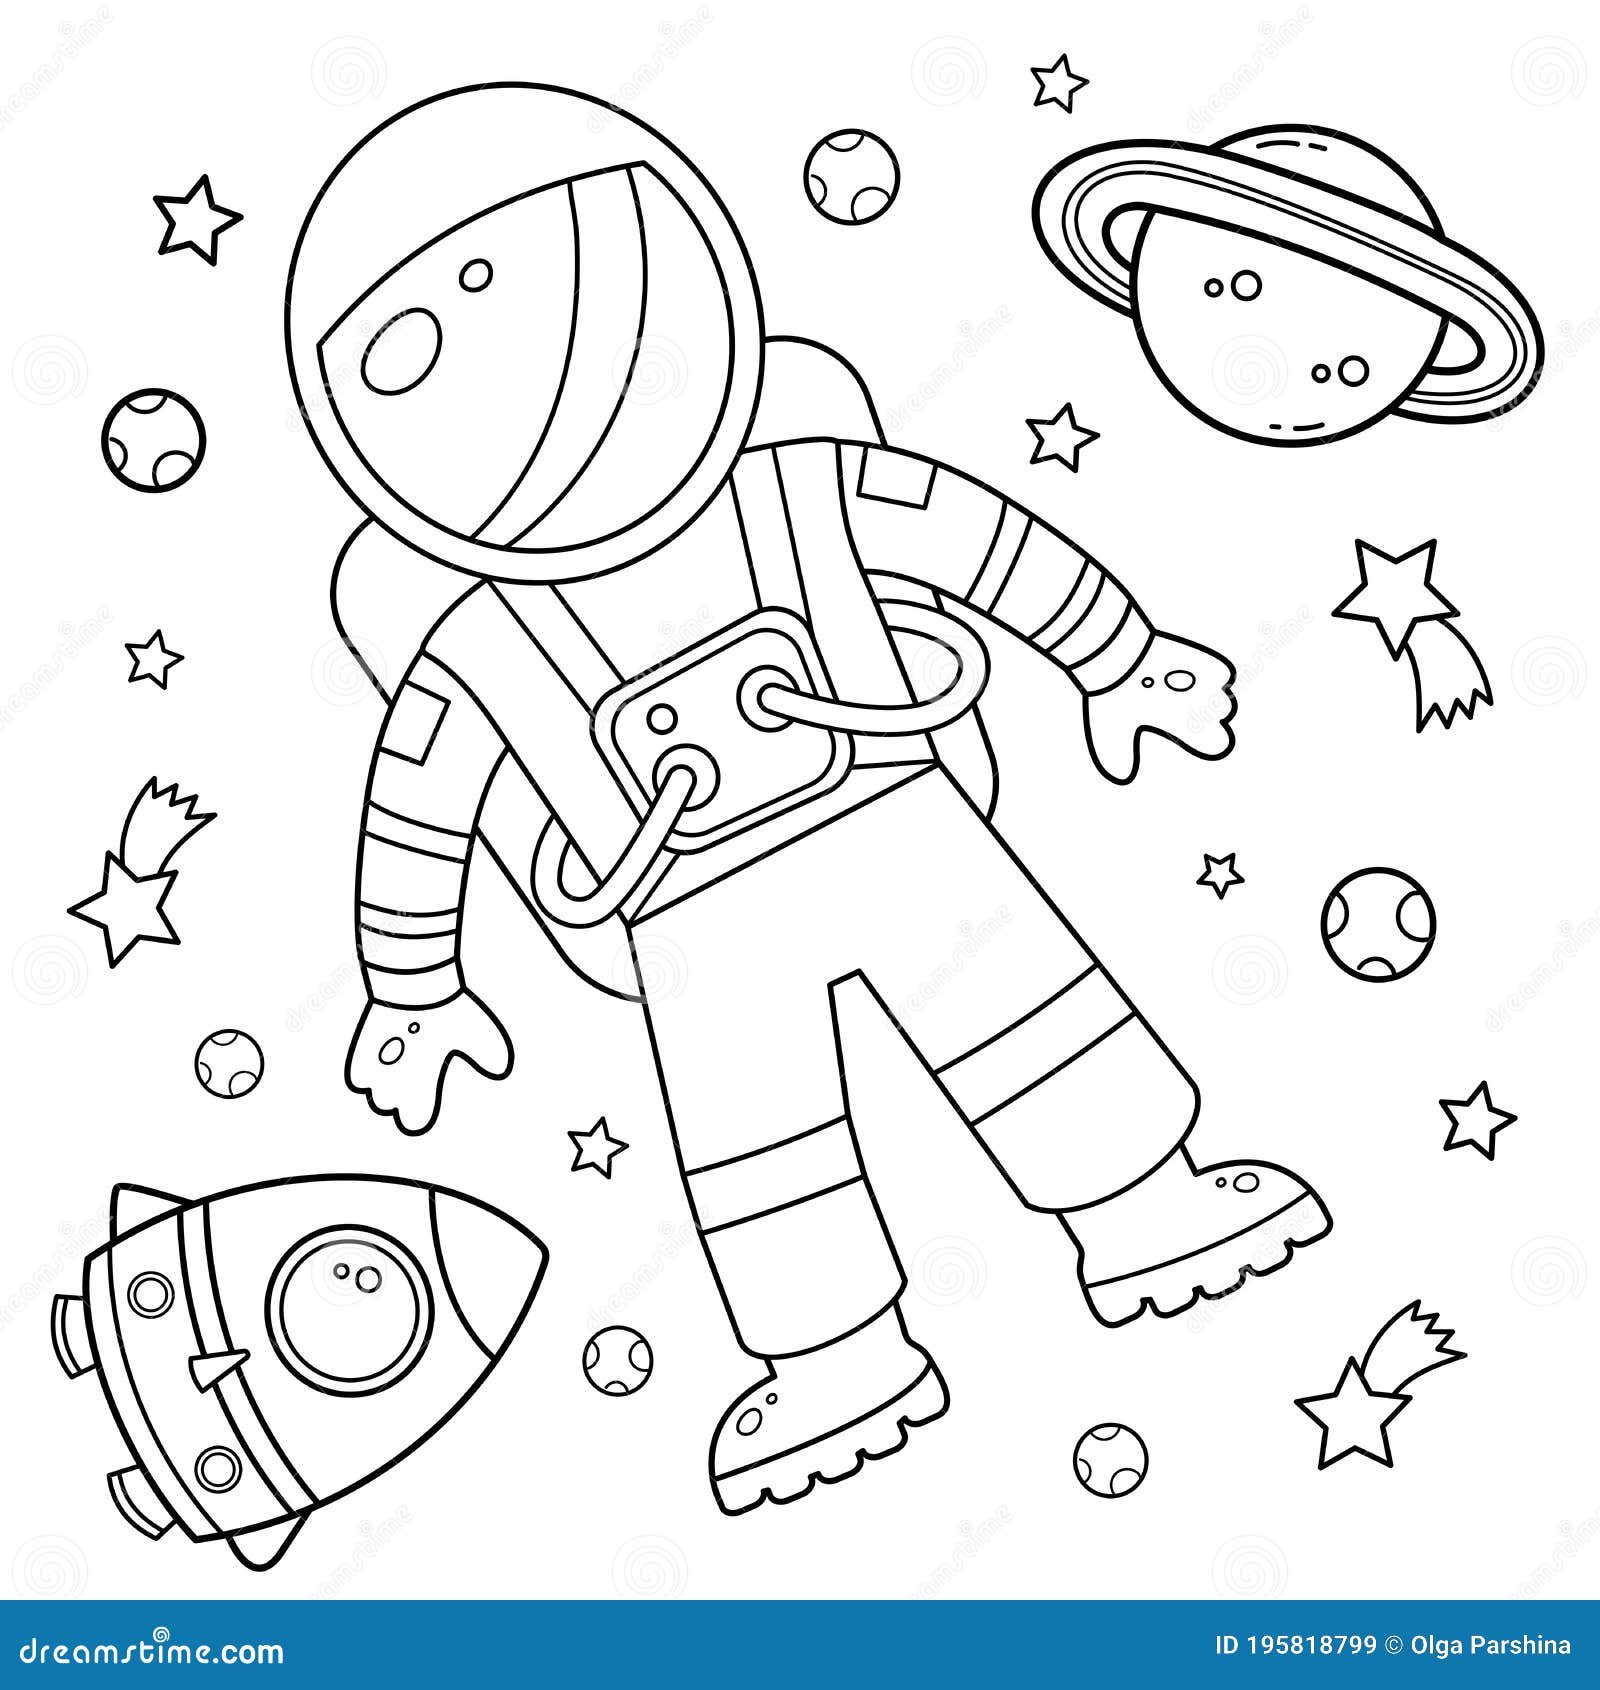 Coloring Page Outline of a Cartoon Rocket with Astronaut in Space ...